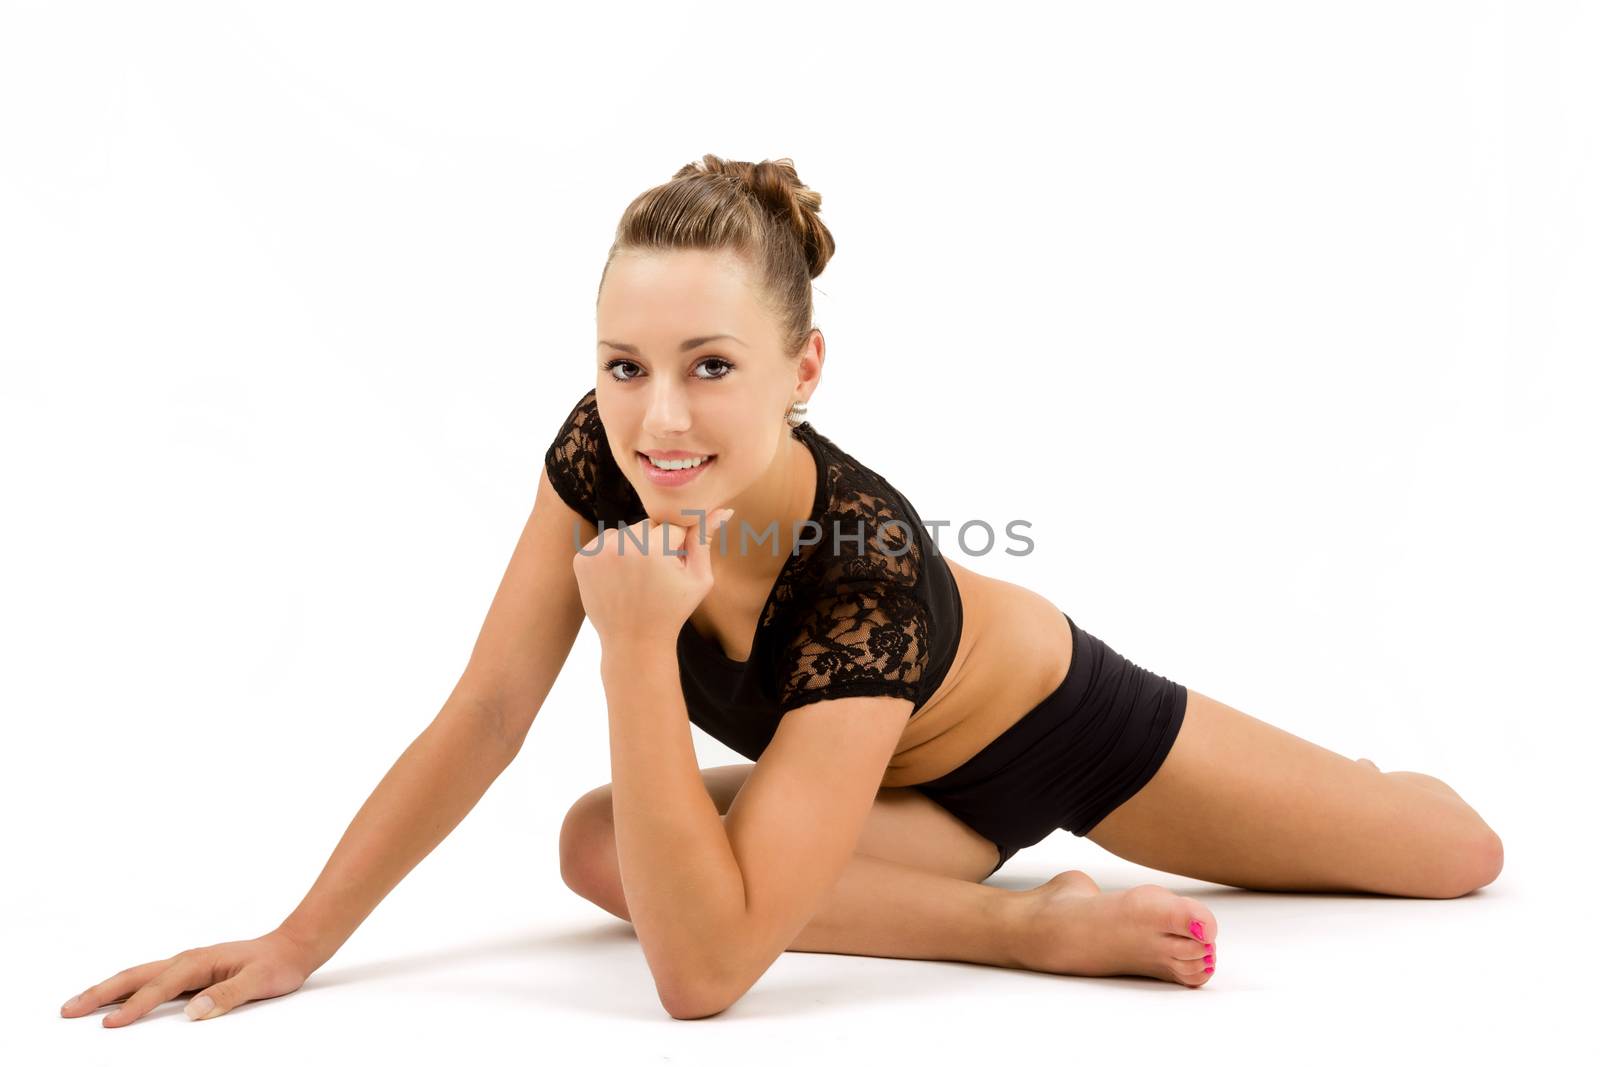 beauty contortionist prepare practicing gymnastic yoga isolated on white background, Young professional gymnast woman